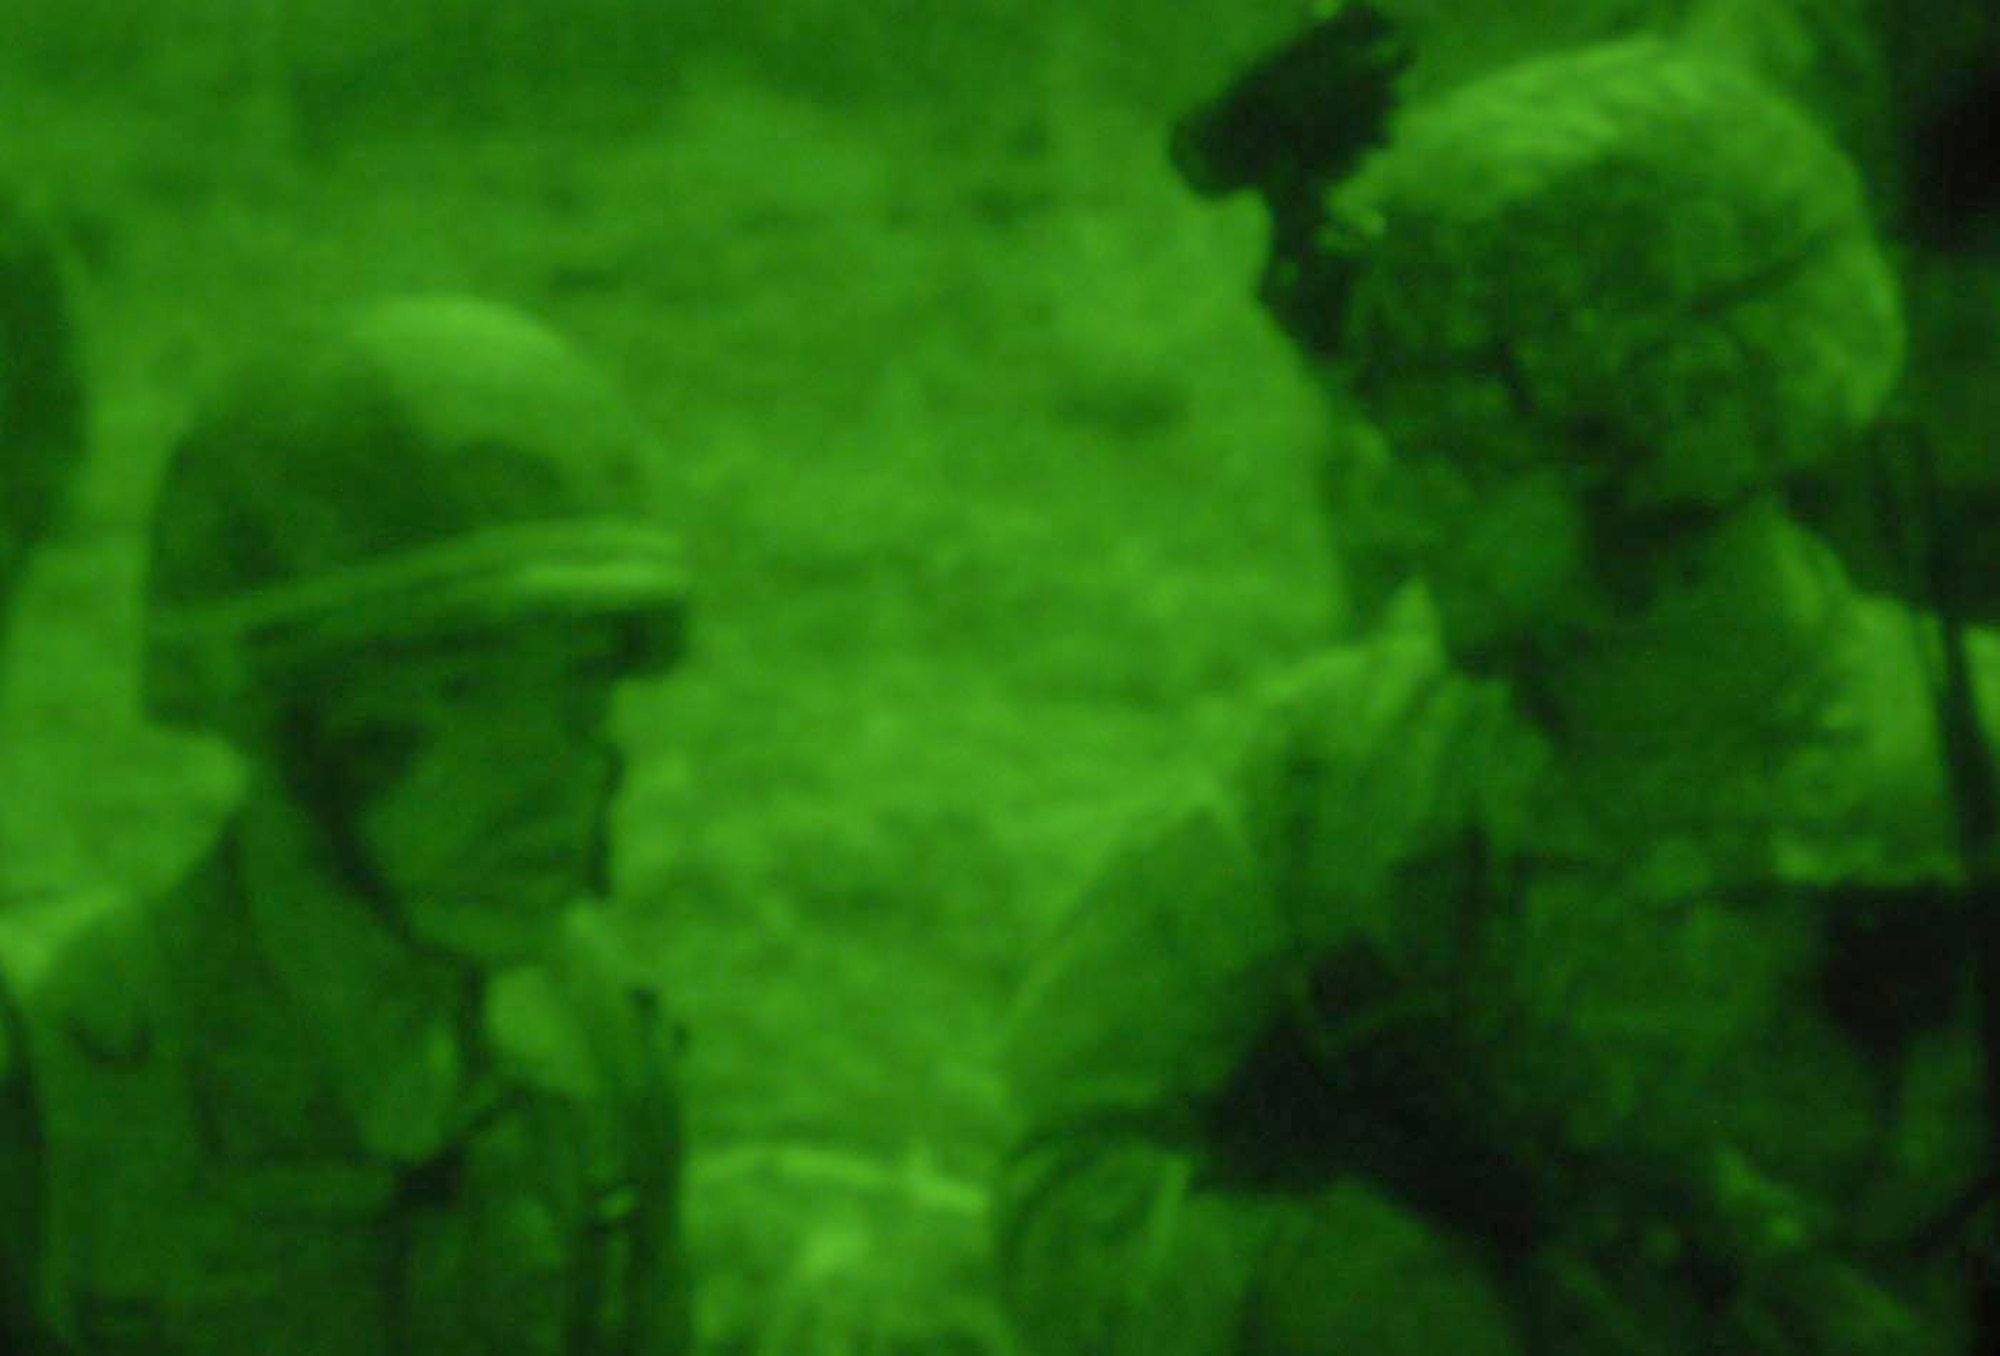 Thai and U.S. officers discuss plans and tactical options under cover of darkness
during a Cobra Gold training mission. (U.S. Army  photo/Staff Sgt. Matthew E. Winstead)